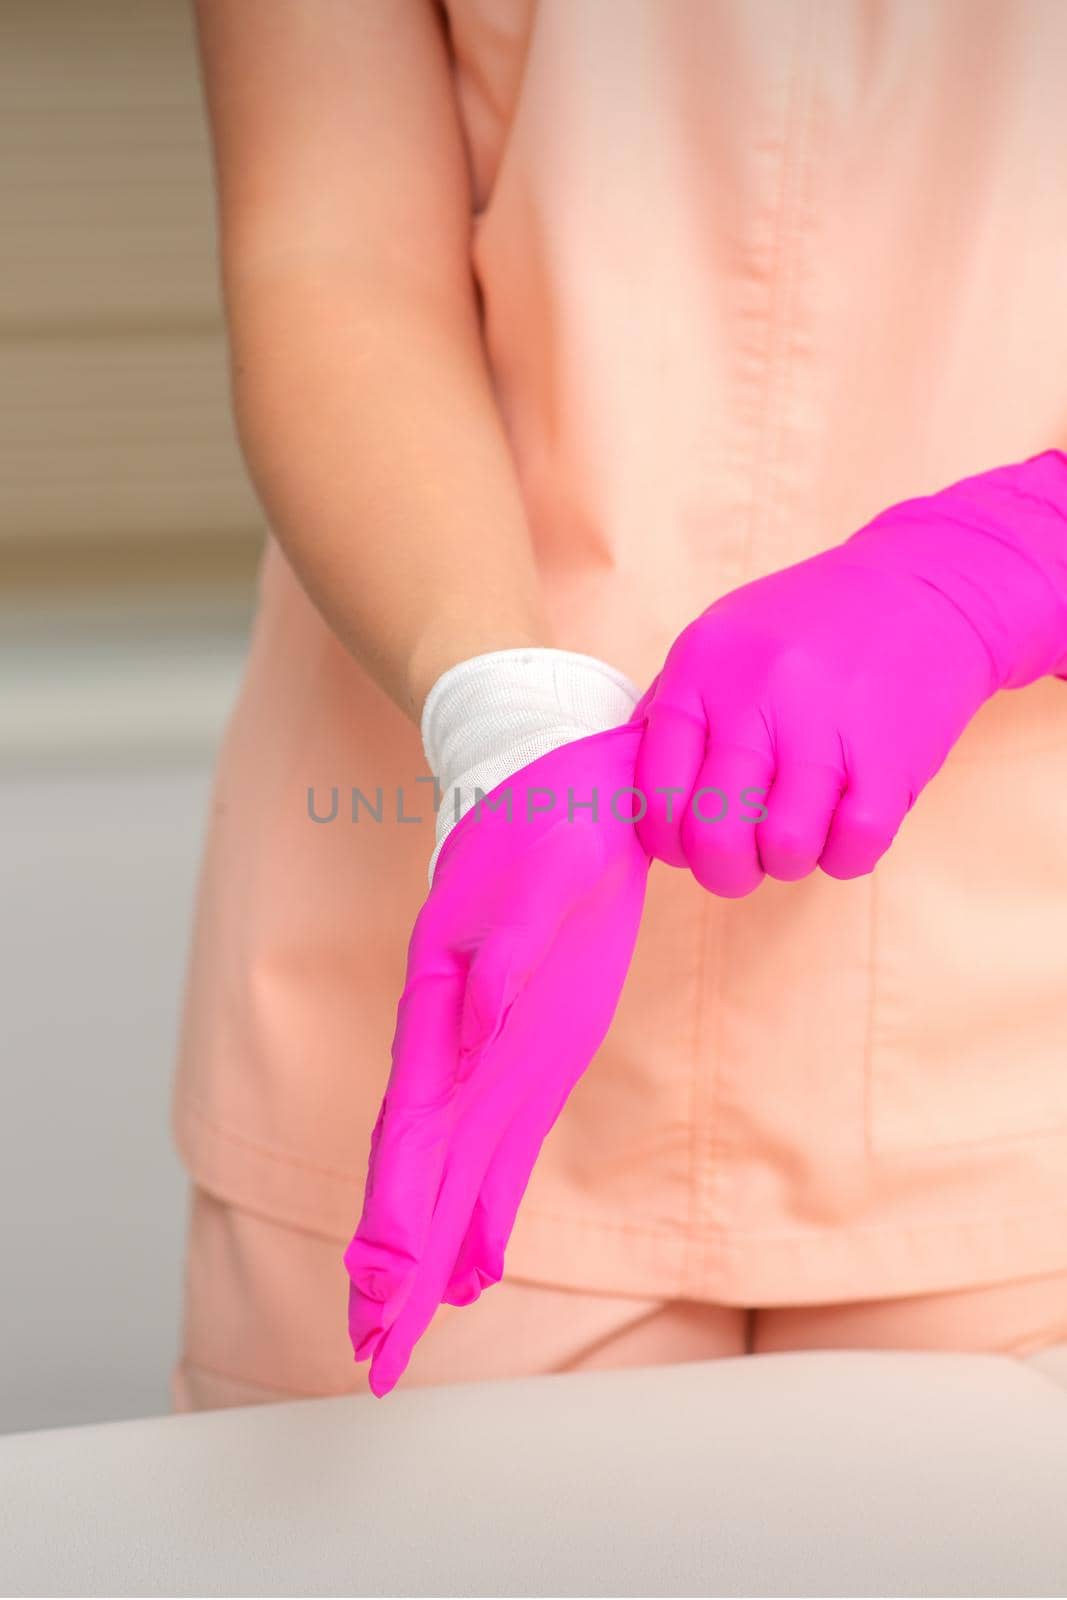 Hand of beautician puts on sterile pink gloves prepares to receive clients indoors. by okskukuruza